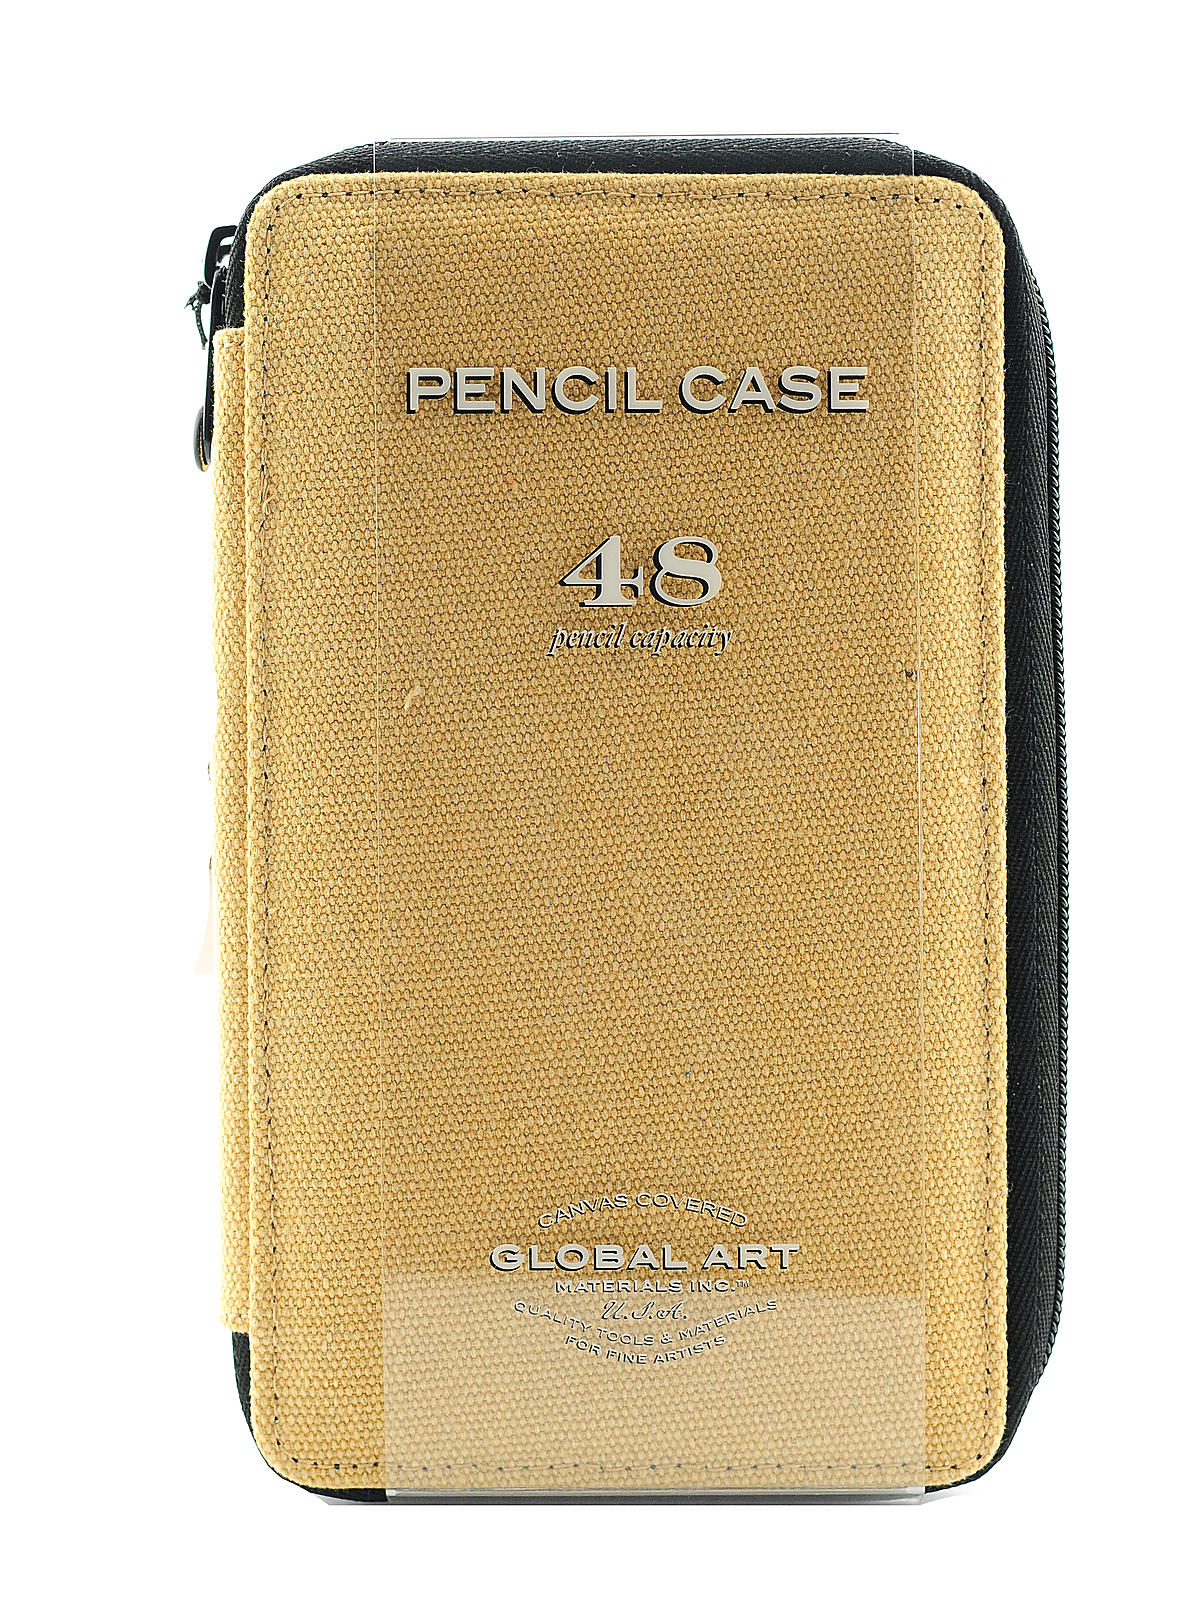 Canvas Pencil Cases Wheat Holds 48 Pencils